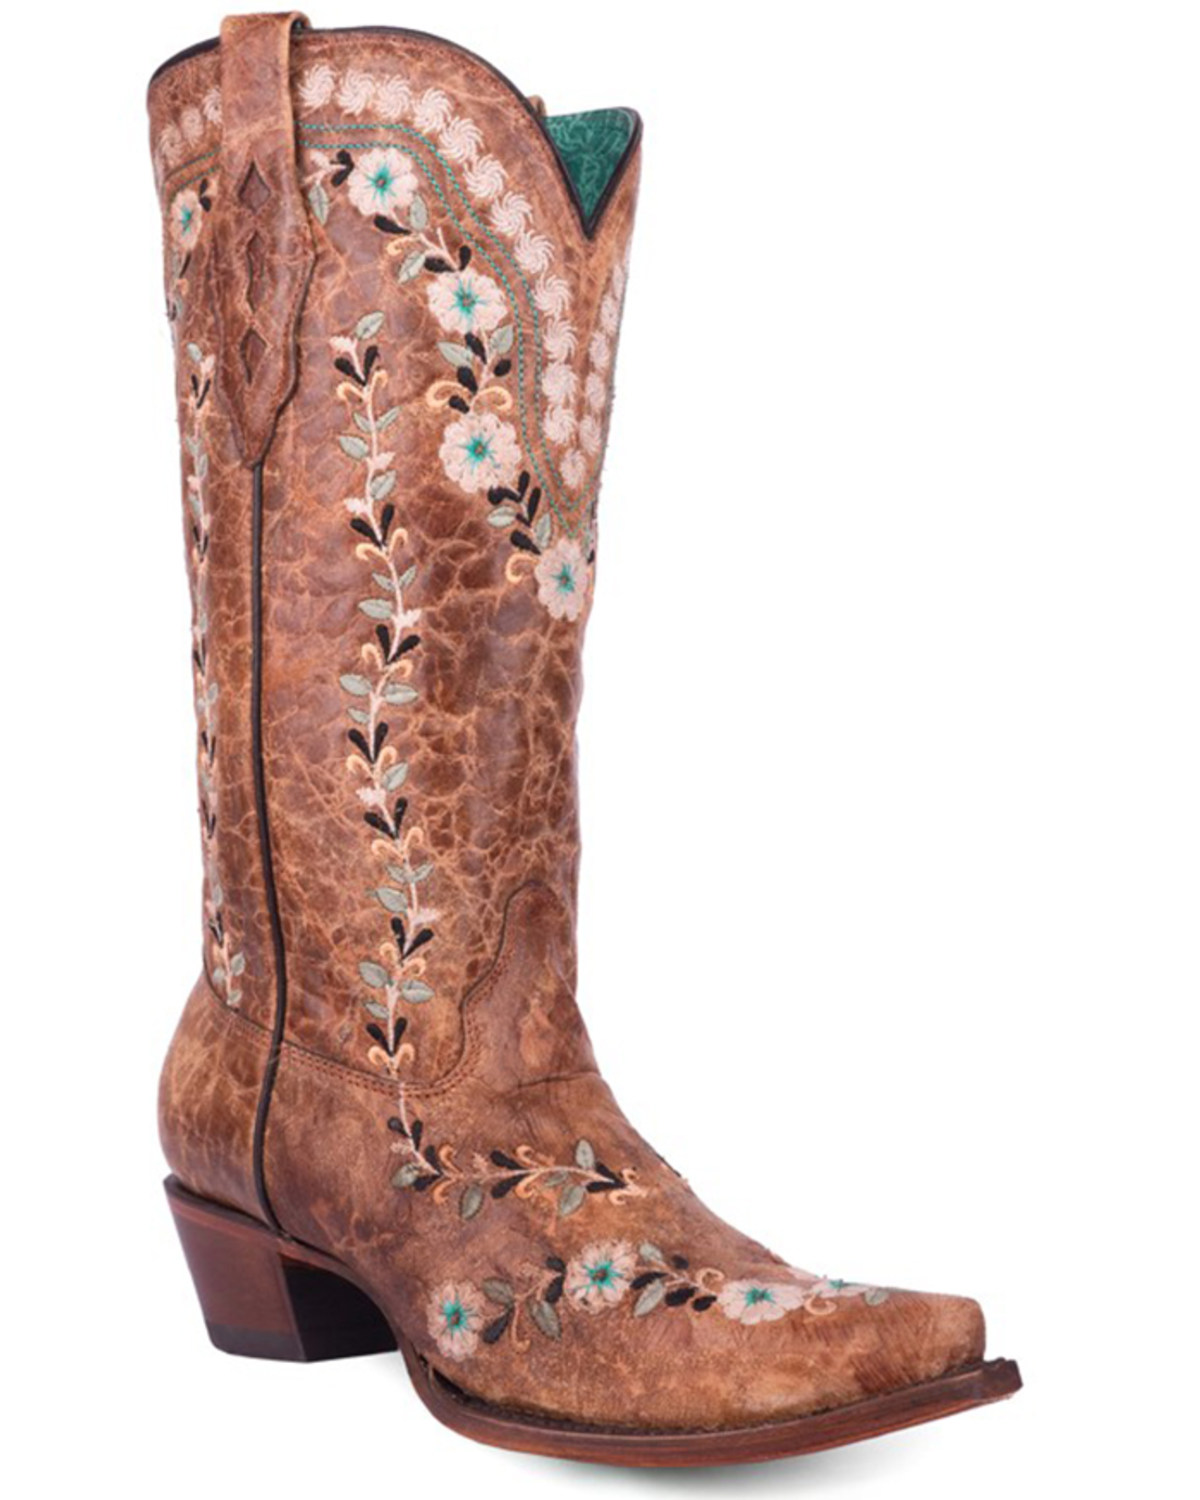 Corral Women's Flowered Embroidery Blacklight Western Boots - Snip Toe